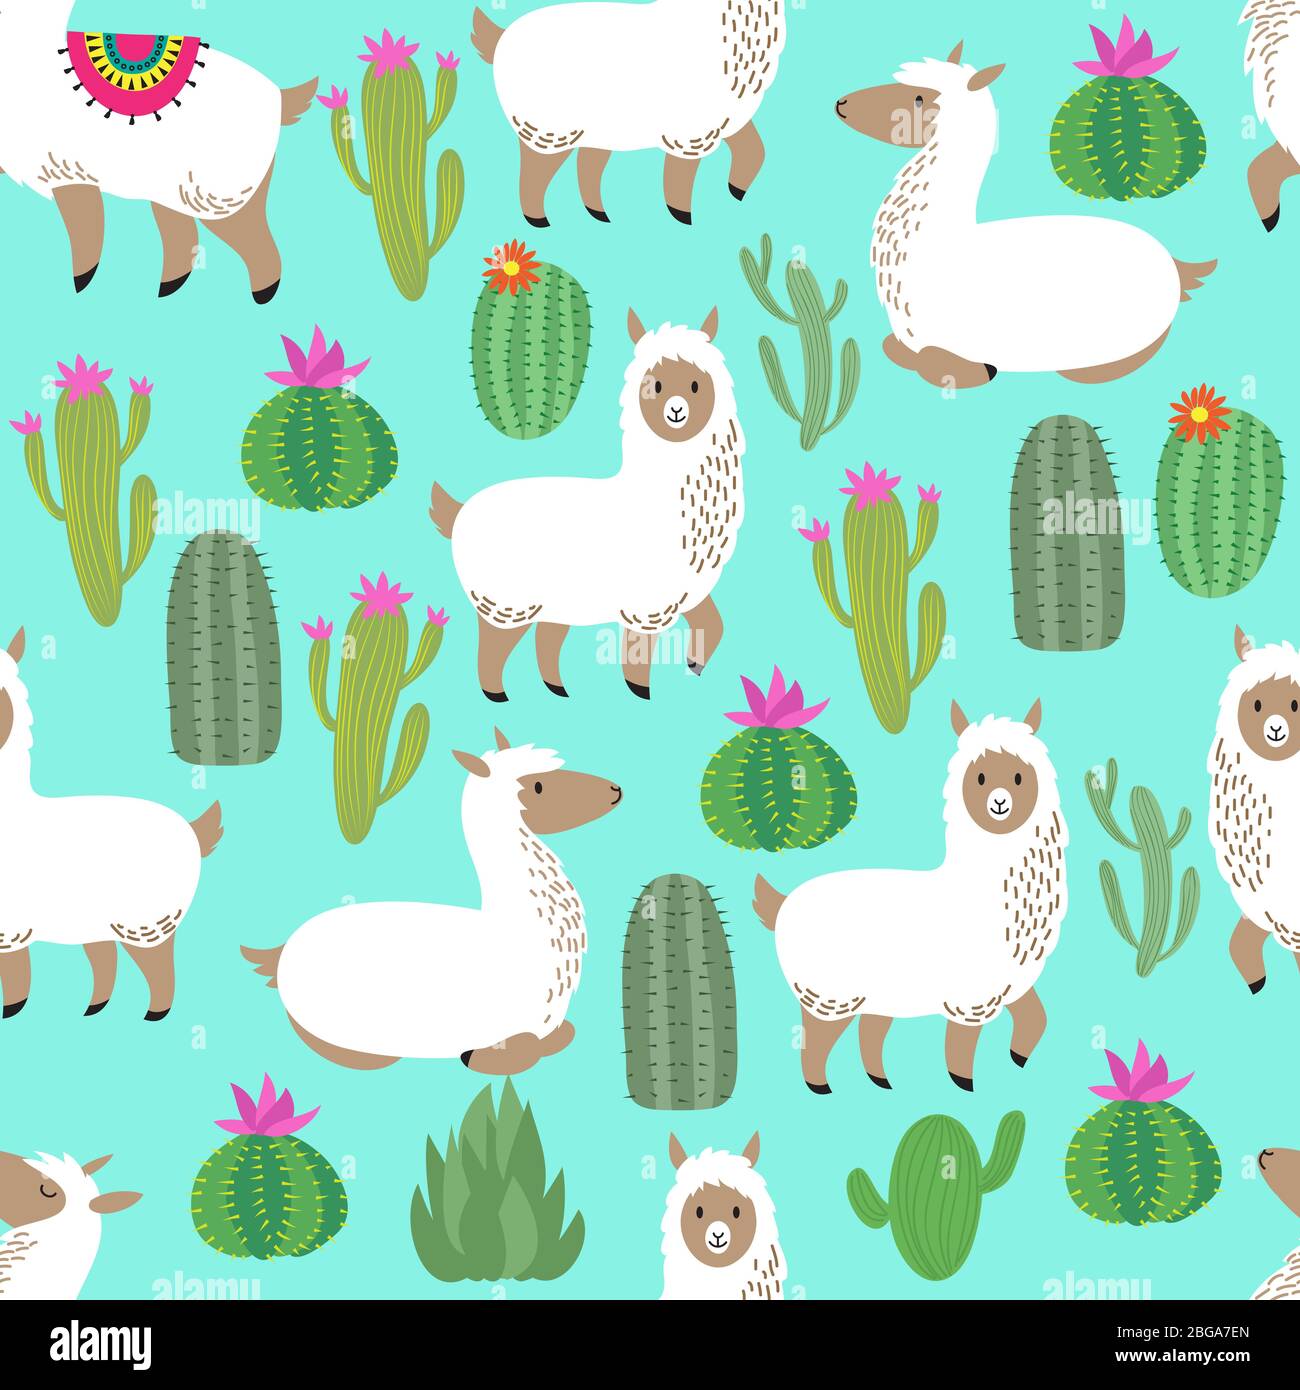 Alpaca seamless vector pattern. Cute llama baby repetitive background. Lama and cacti pattern in cartoon style illustration Stock Vector